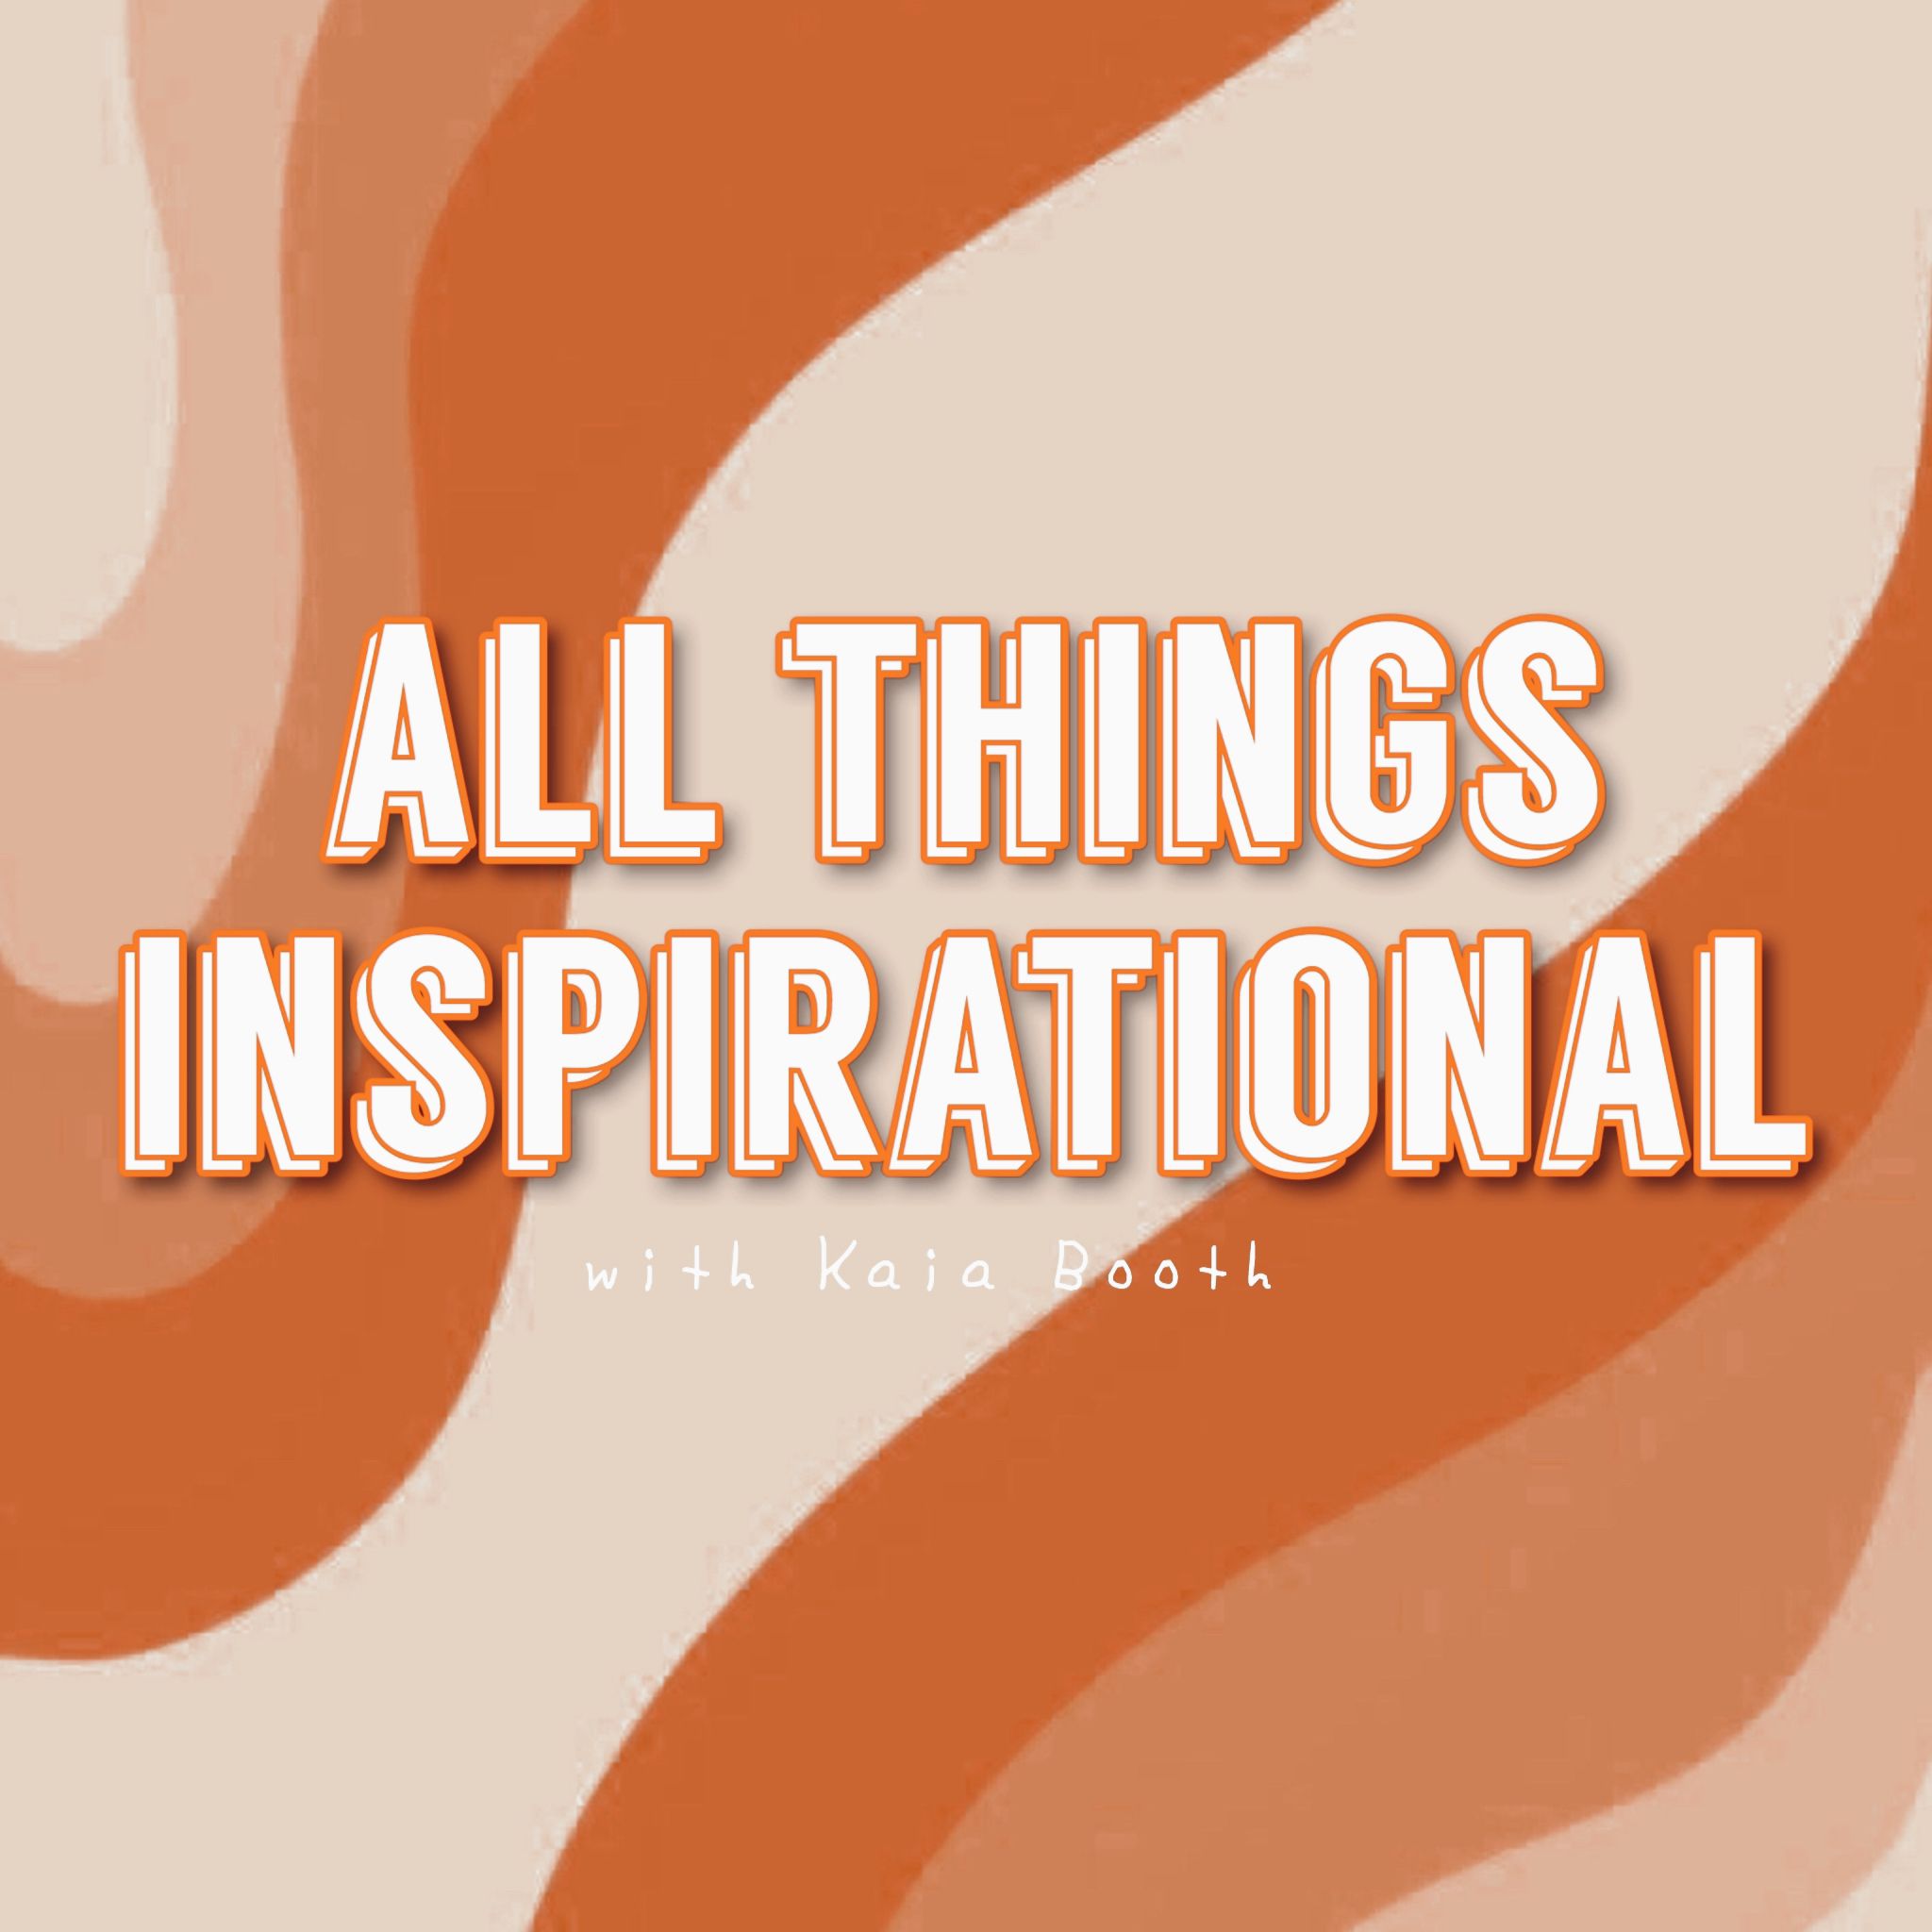 All Things Inspirational